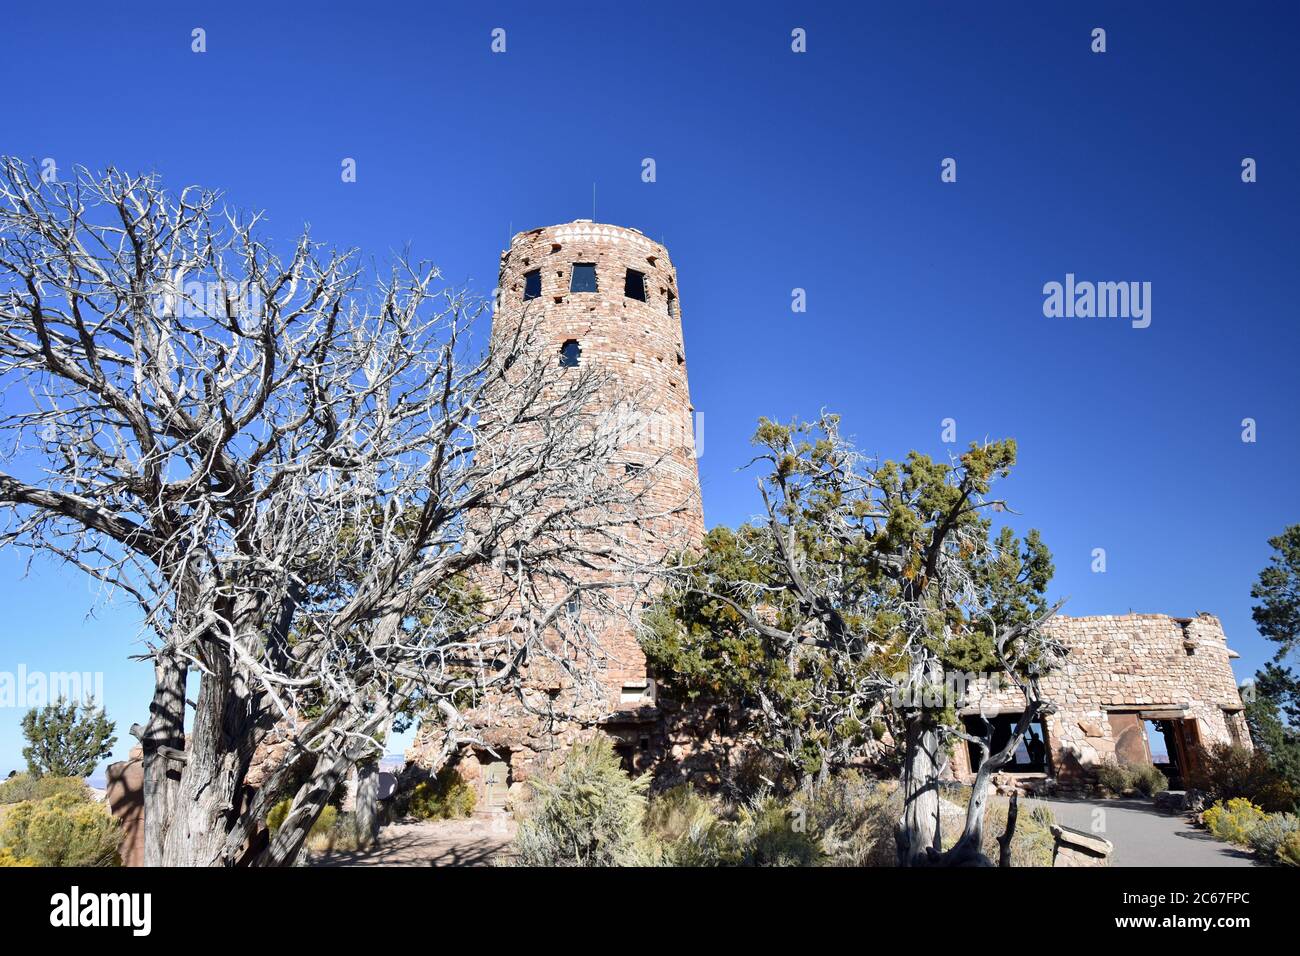 Desert View Watchtower on the south rim of the Grand Canyon, Arizona.  Two trees are in front of the tower and the sky is clear and deep blue. Stock Photo